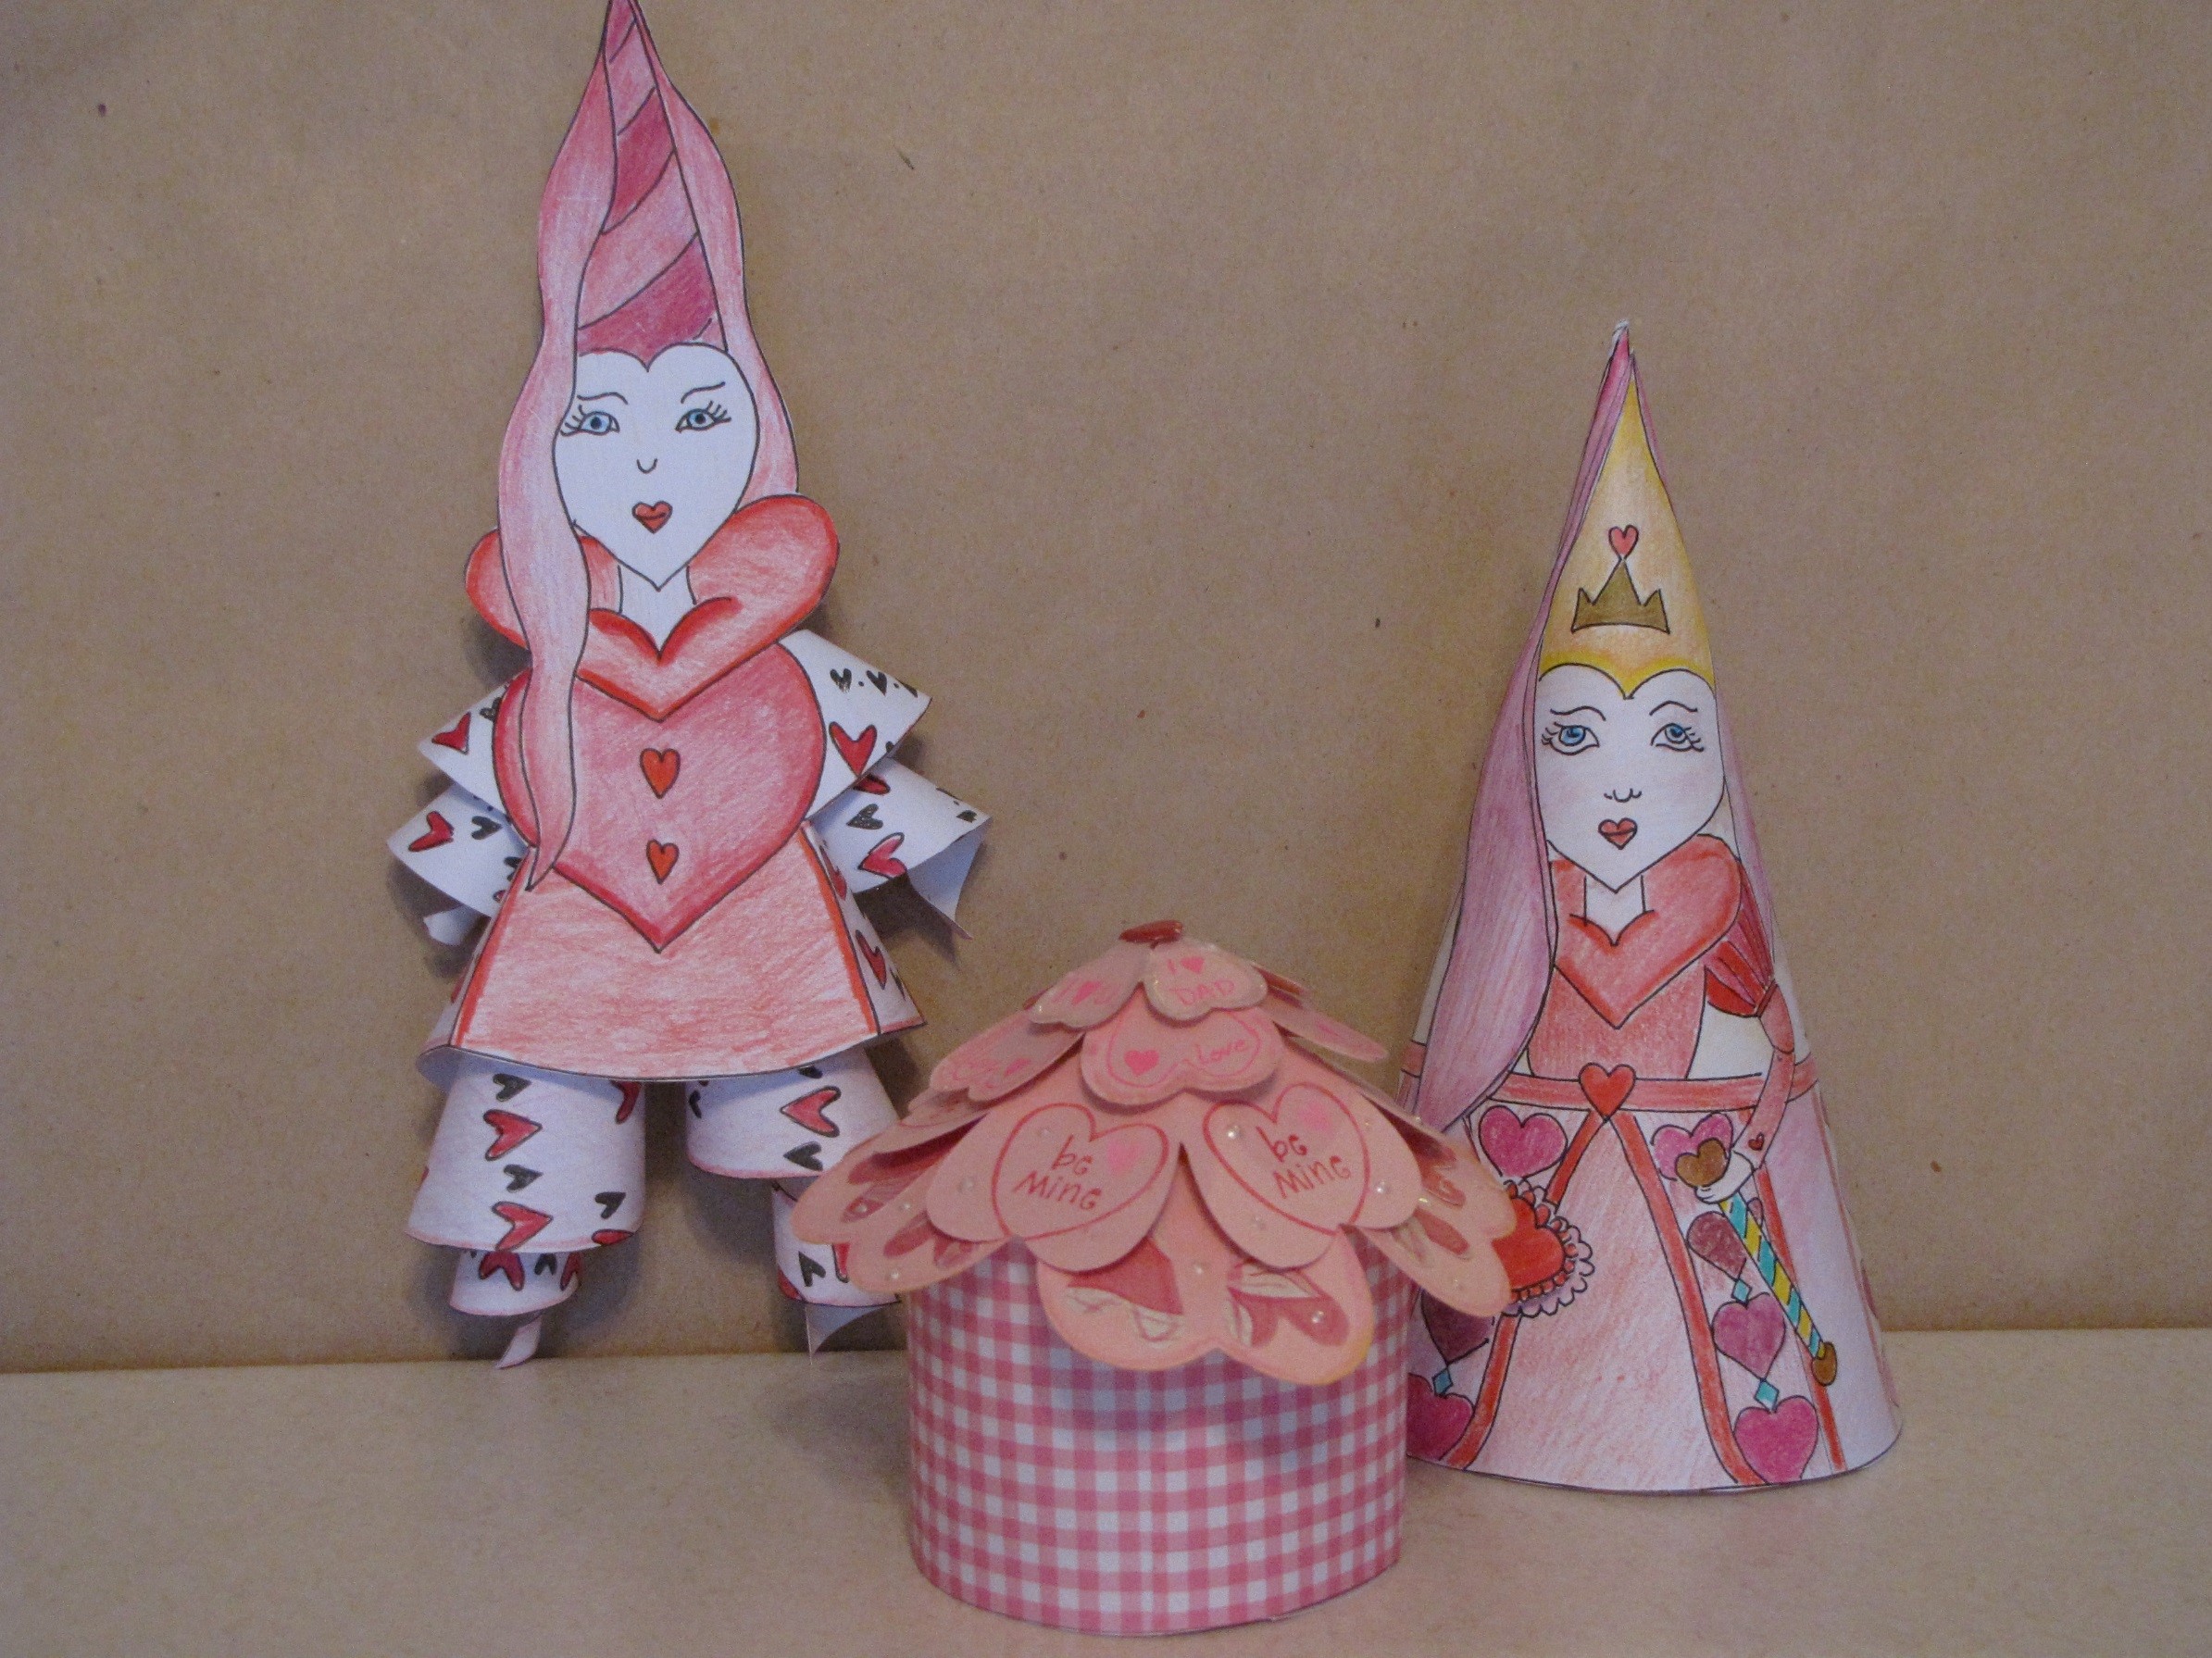 Valentine's Day Crafts - Princess of Hearts (Conehead & Jiggly Legs) & a Cupcake